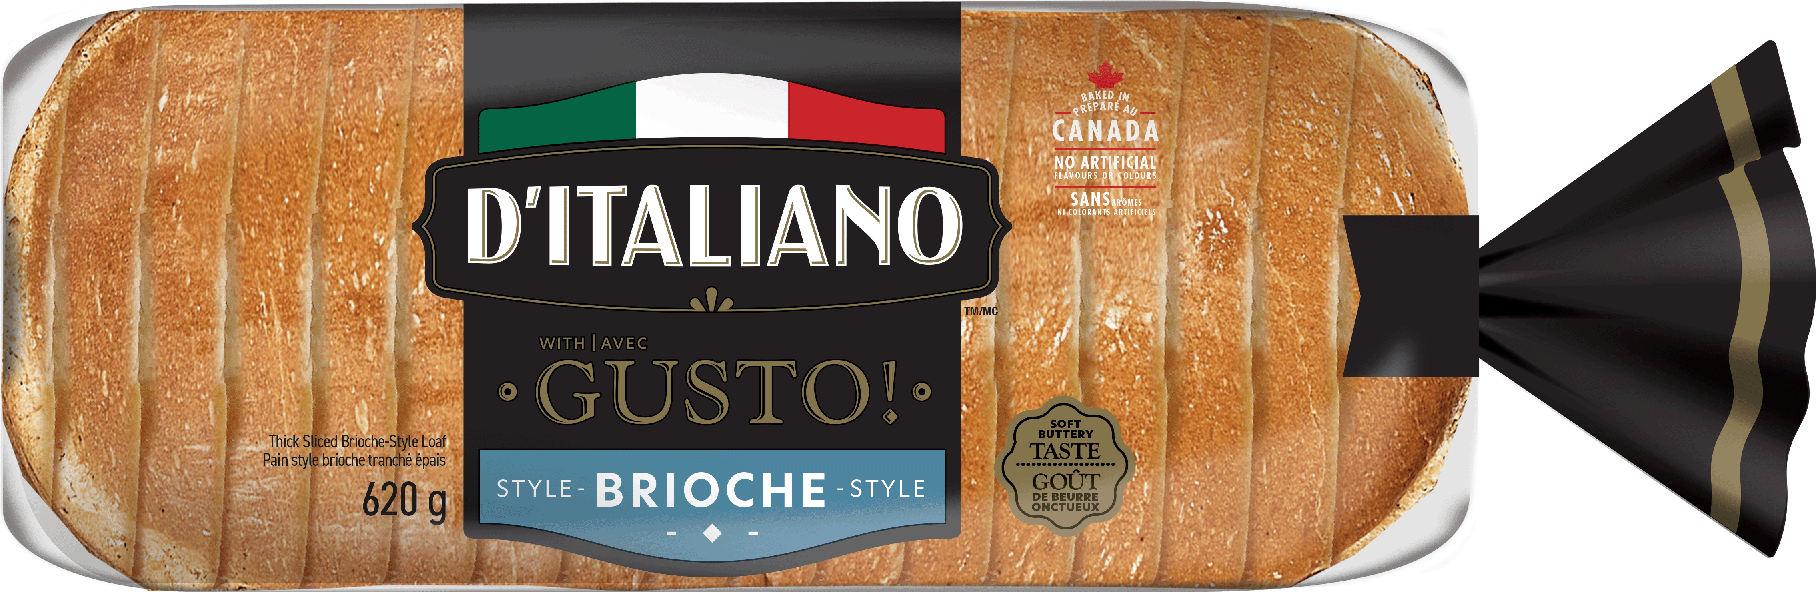 D’Italiano with Gusto!™ Brioche Style Thick Sliced Loaf